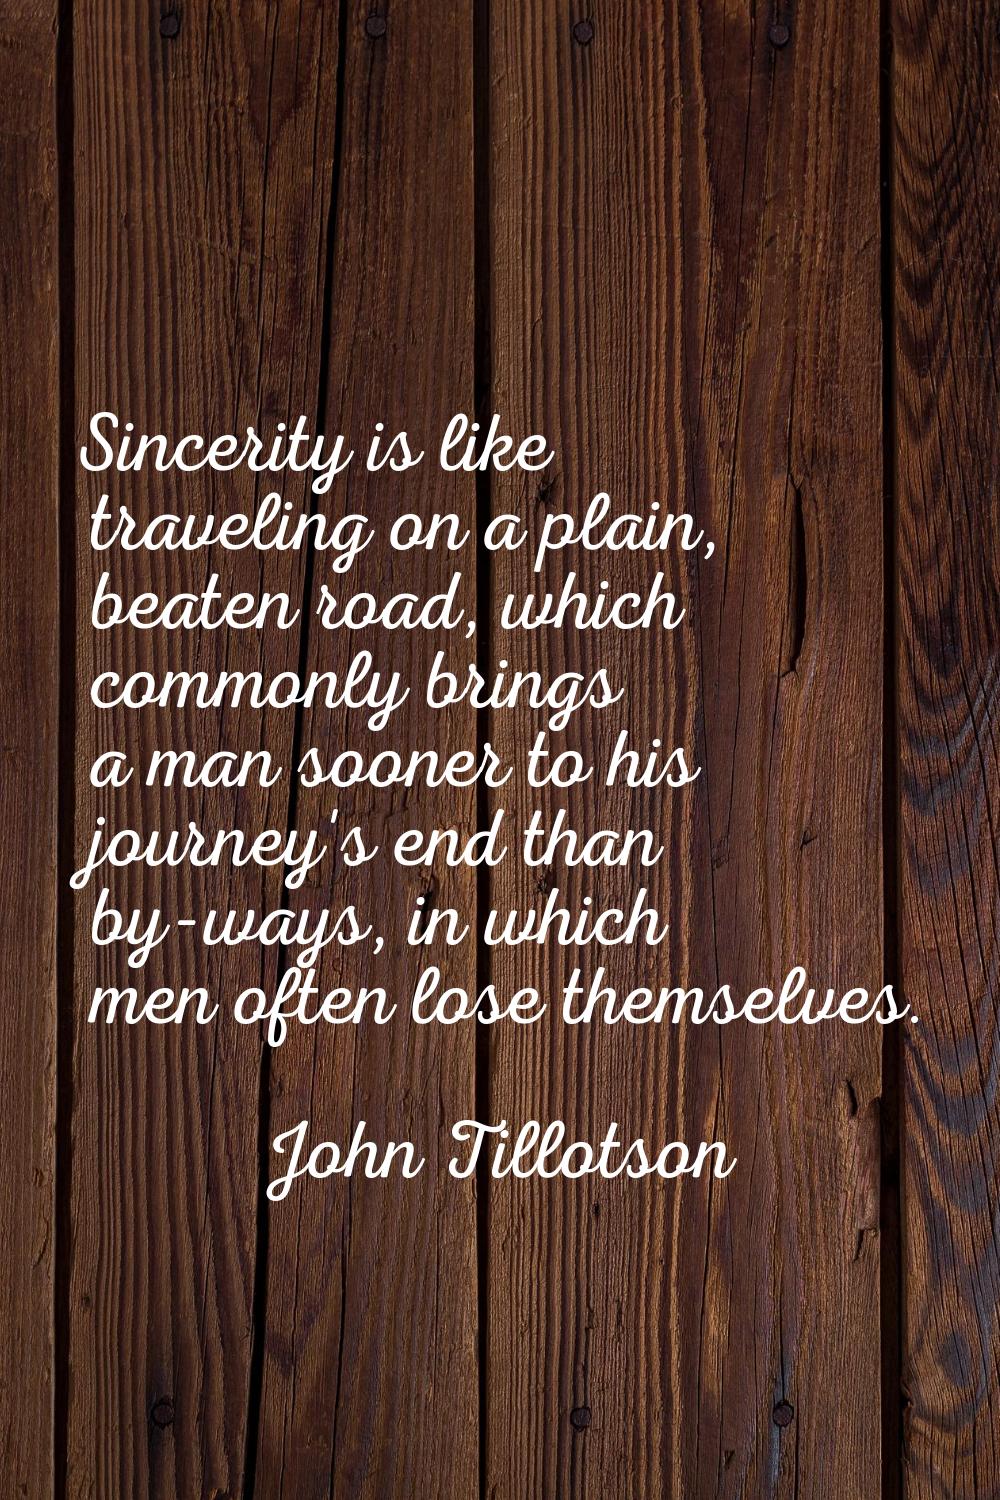 Sincerity is like traveling on a plain, beaten road, which commonly brings a man sooner to his jour